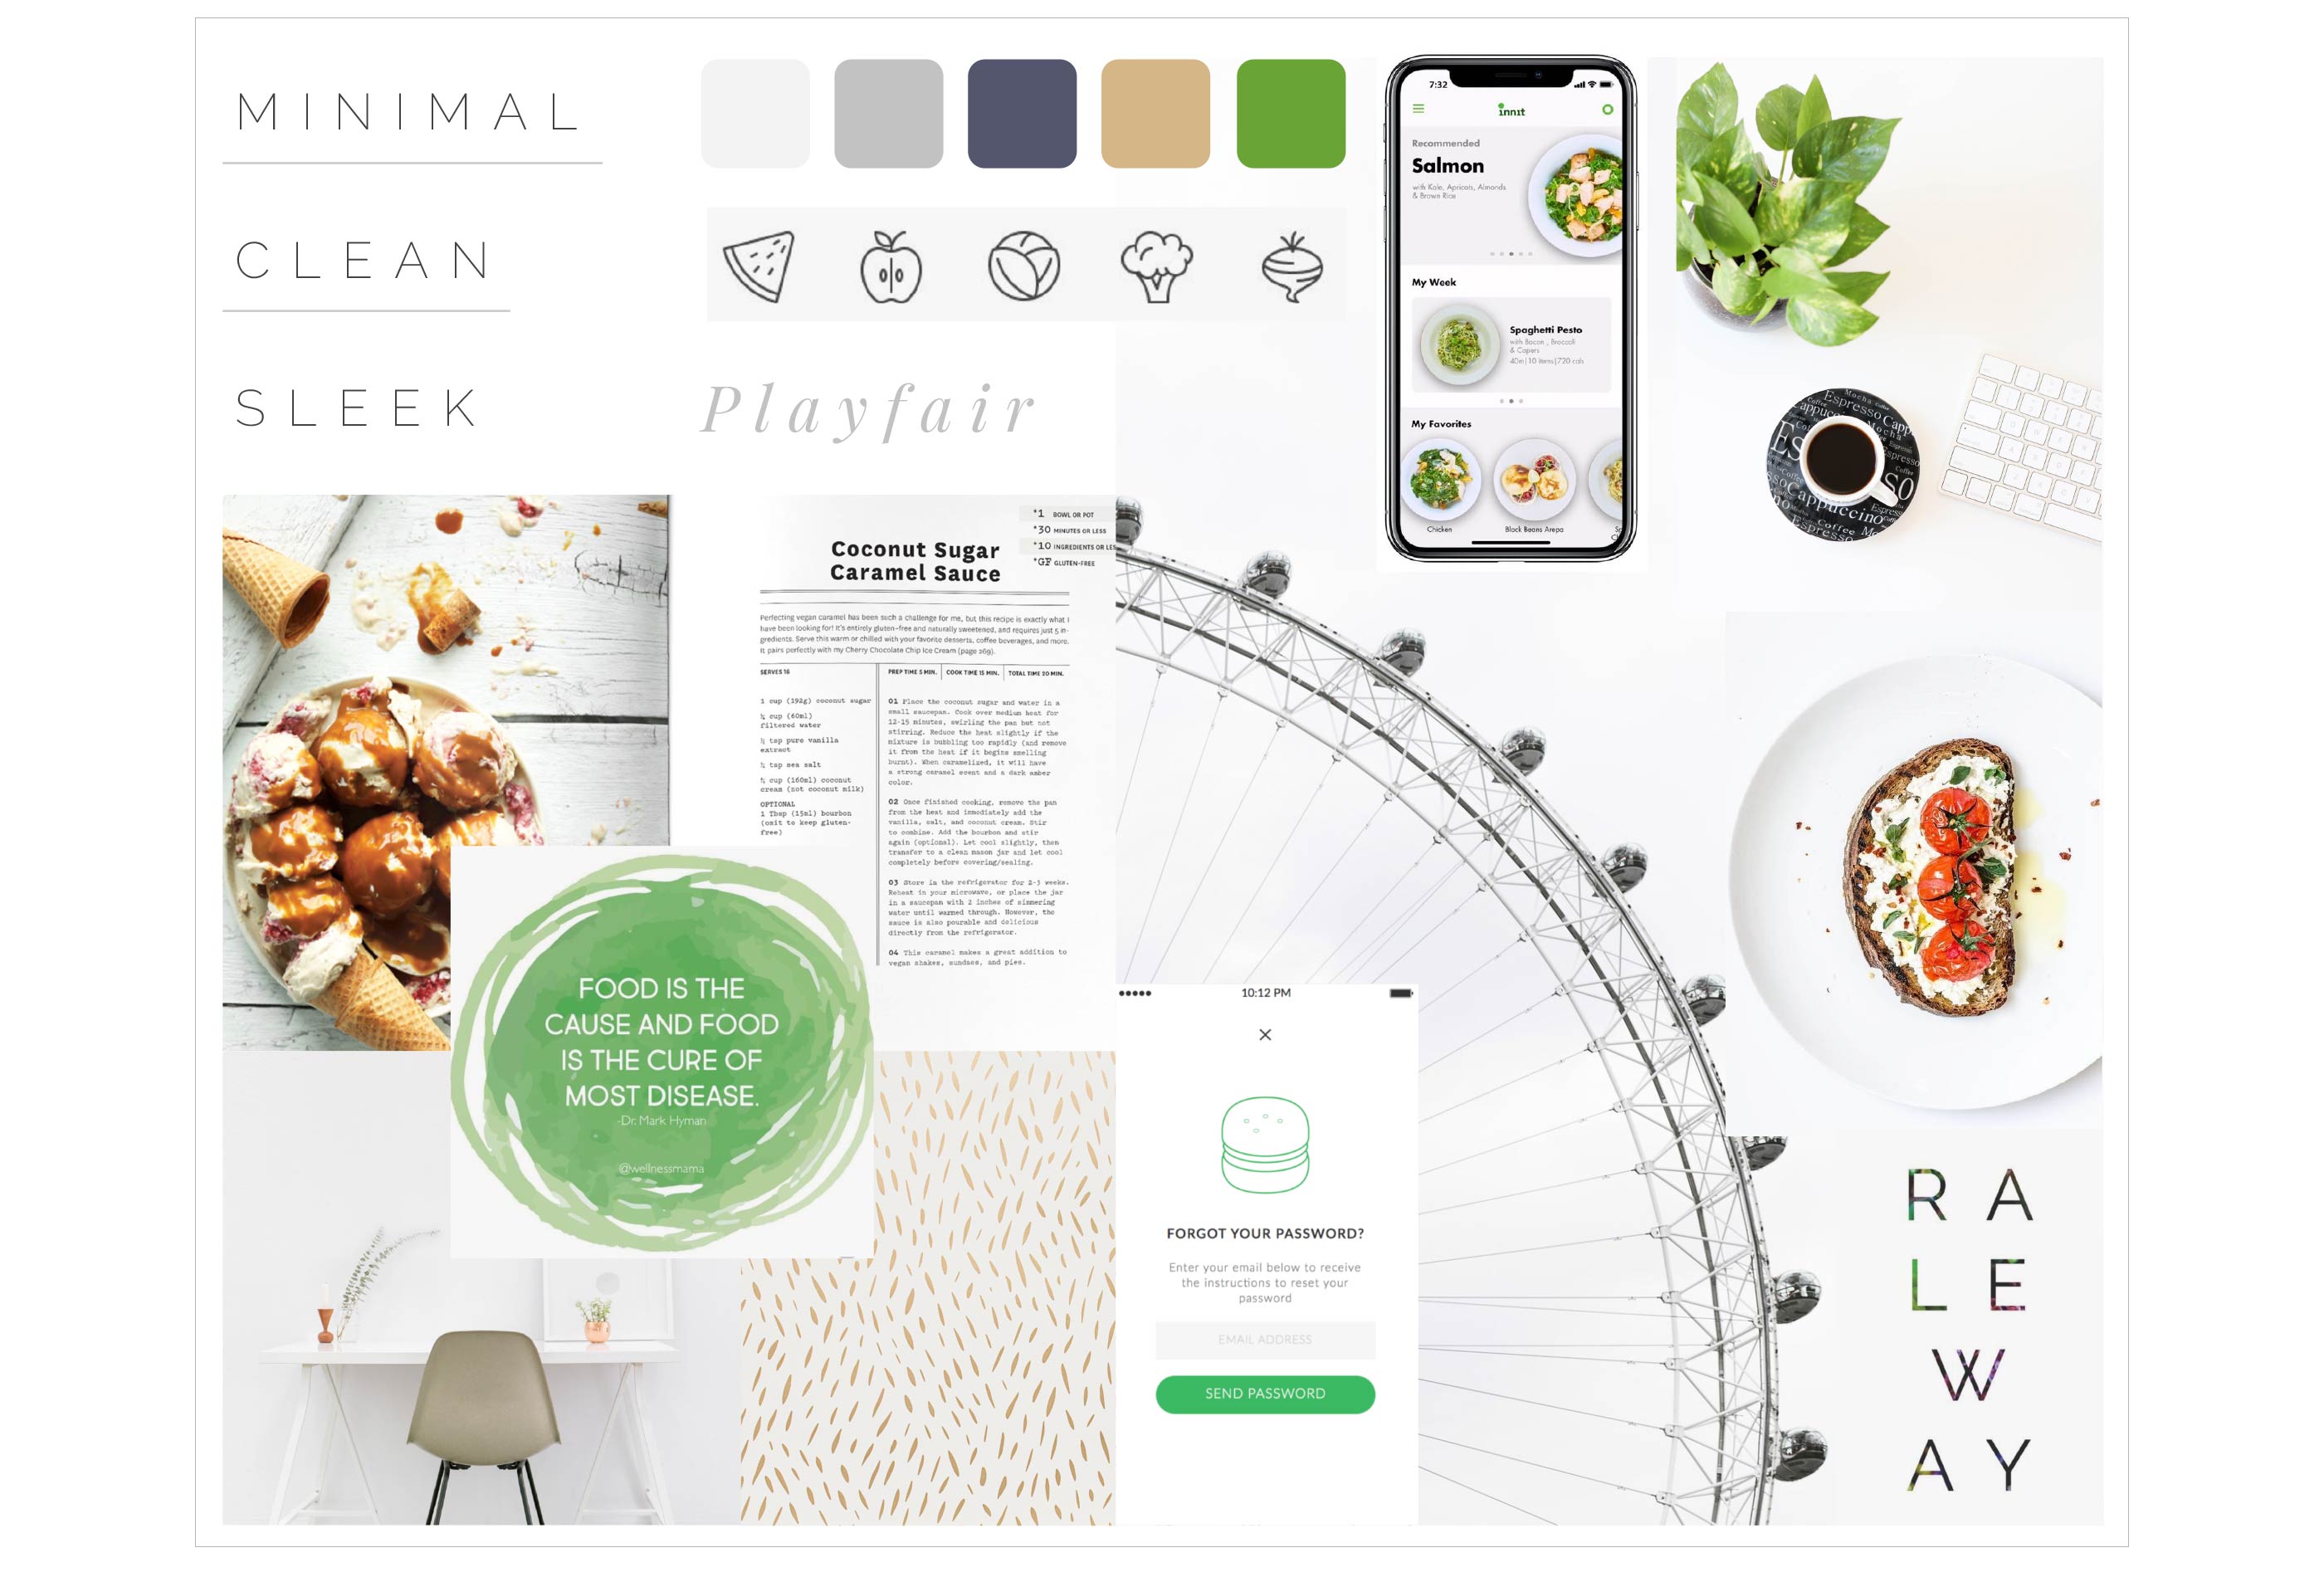 A  moodboard with ideas for minimal, clean, and sleek design.